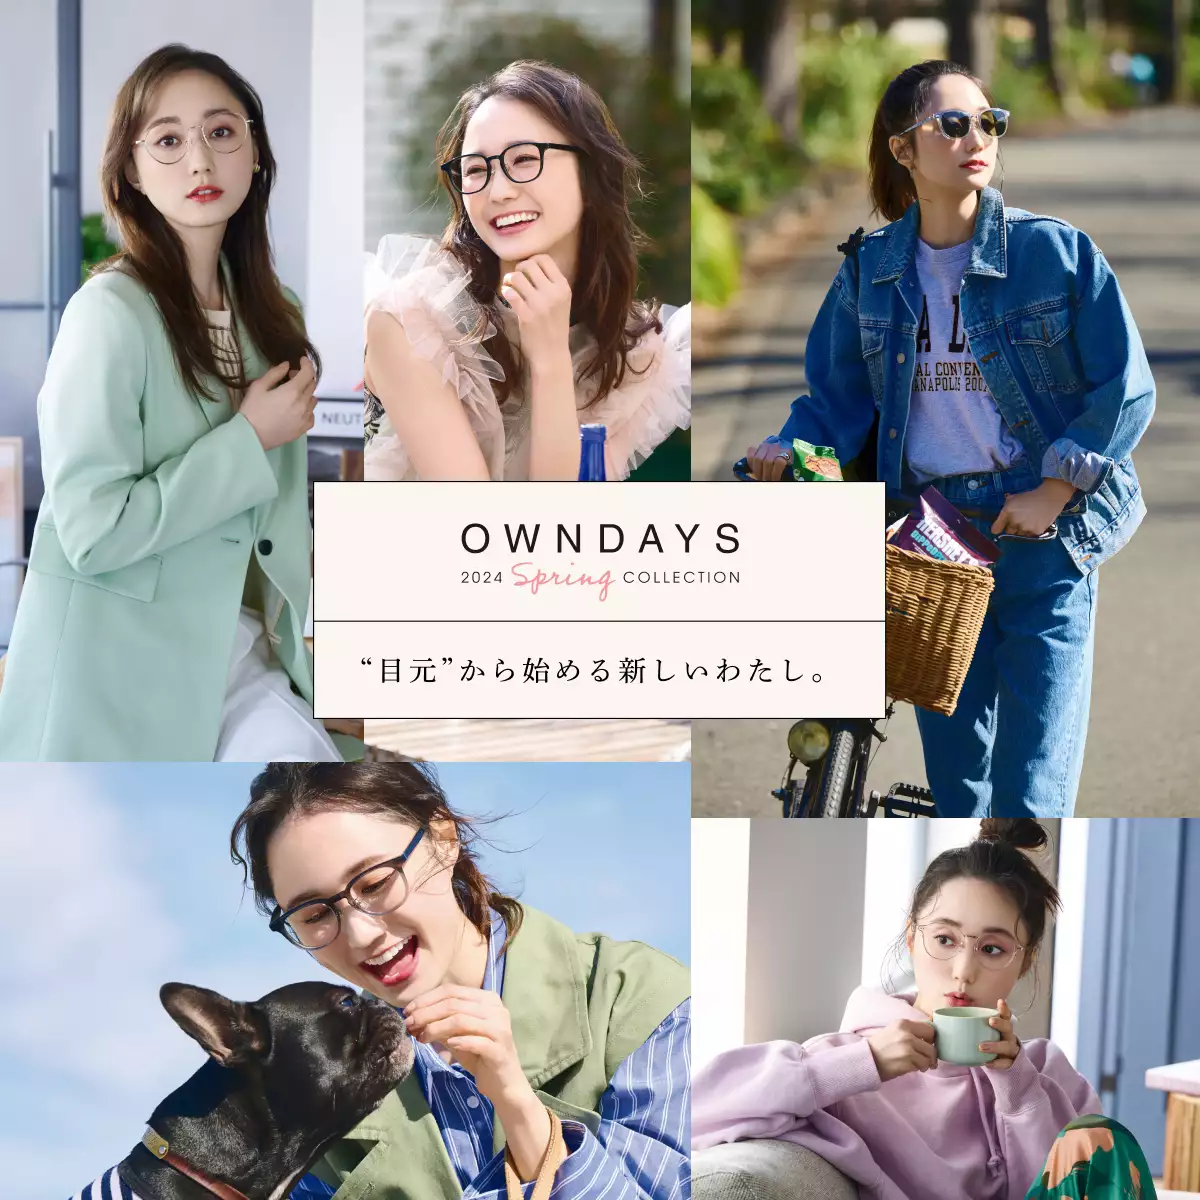 OWNDAYS Spring Collection 2024